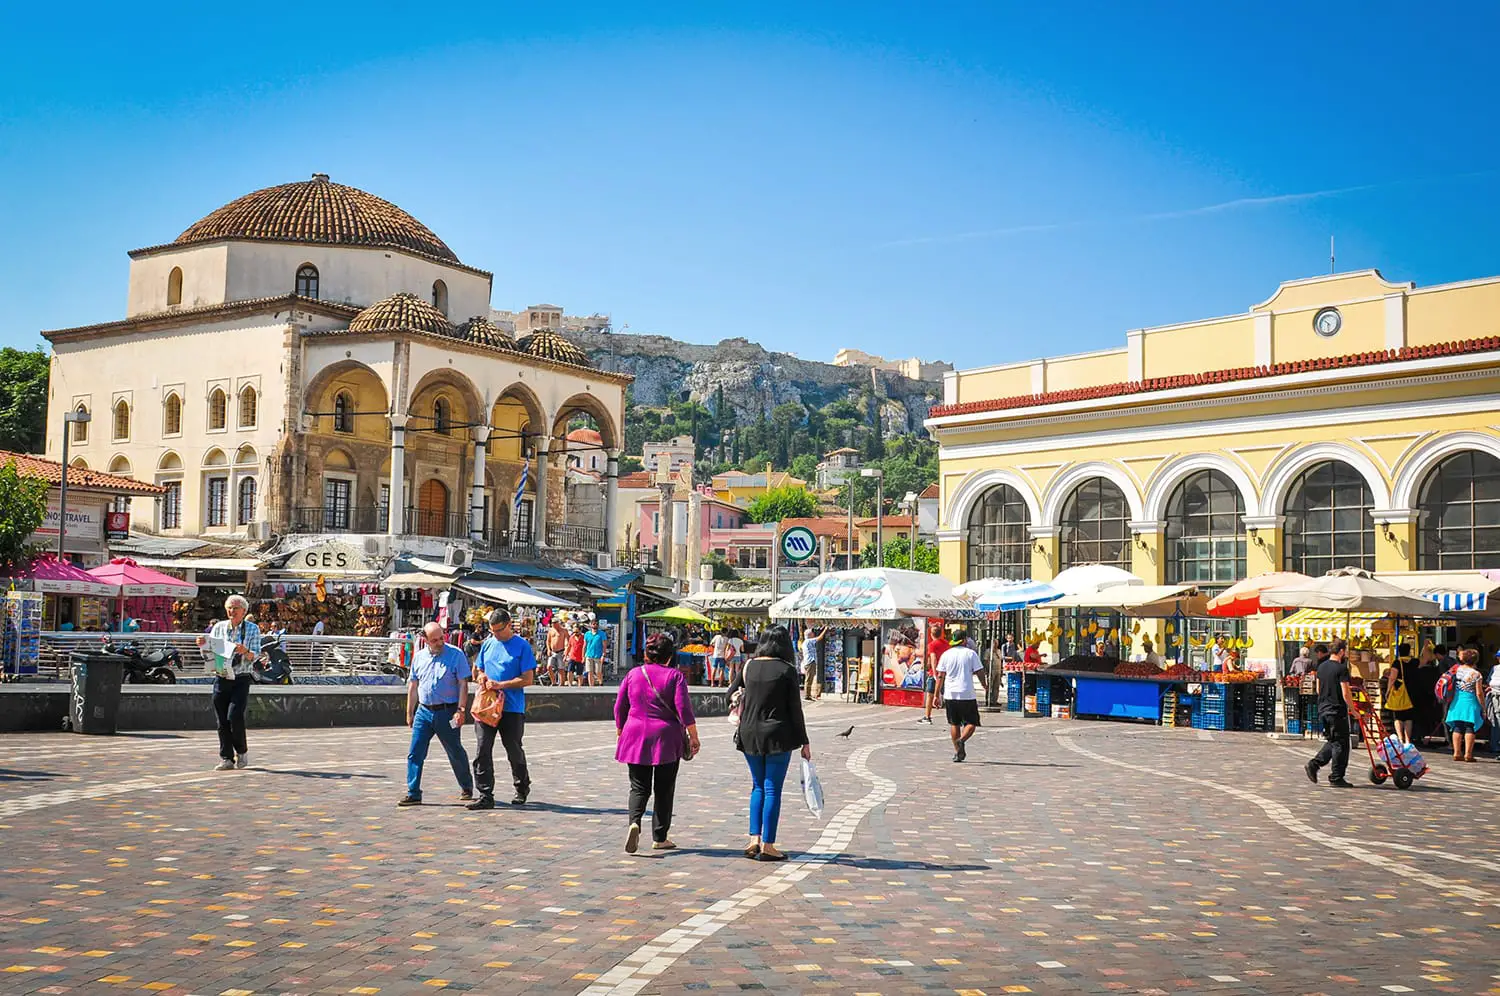 People shop in Monastiraki, a flea market square in the old town of Athens, Greece